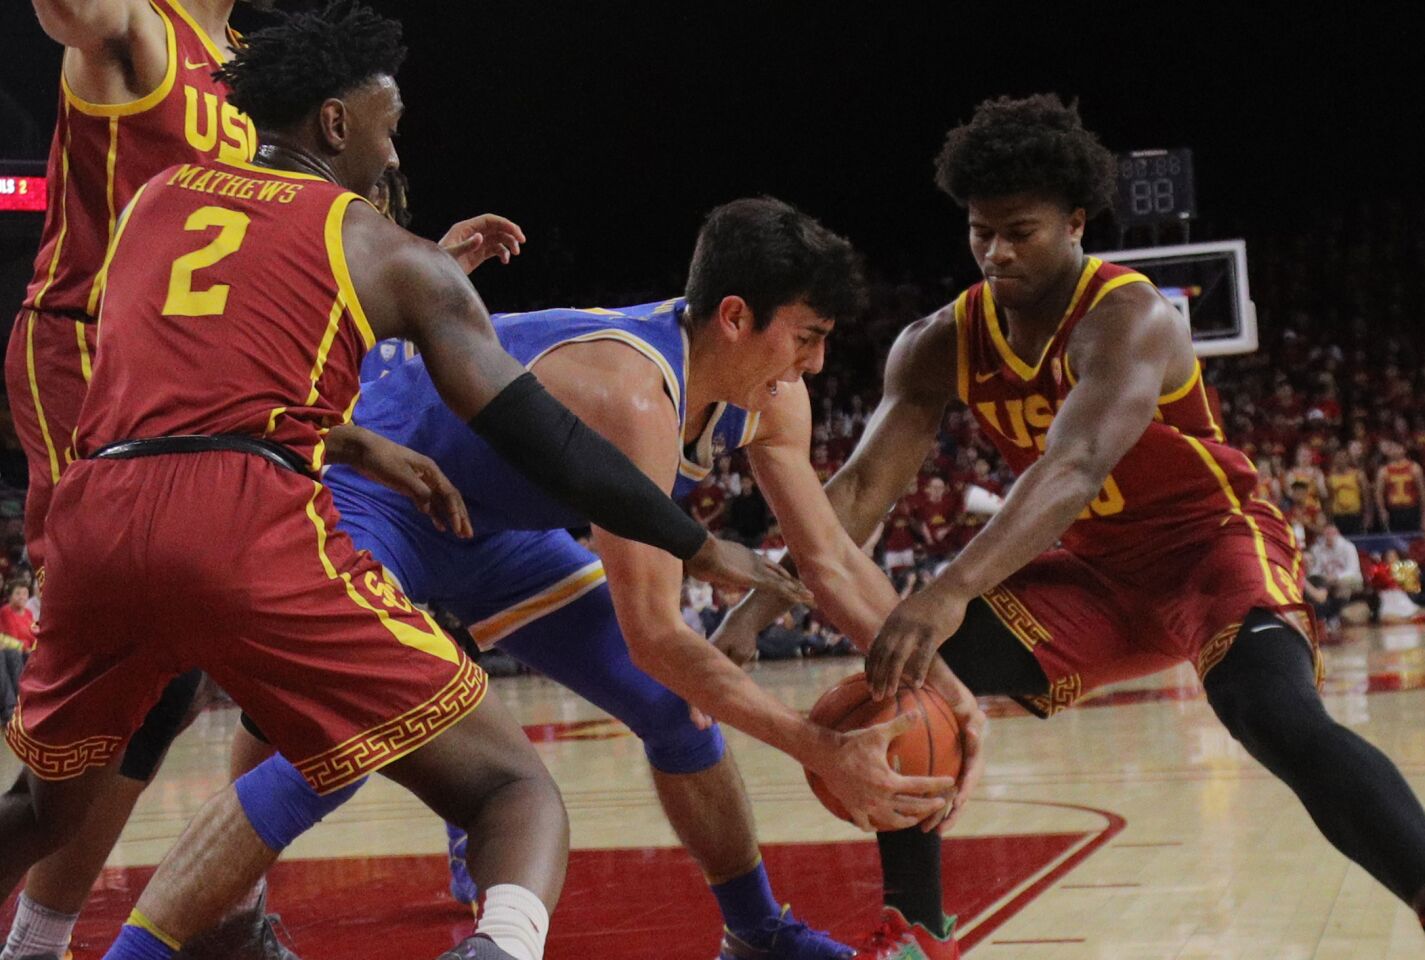 USC guards Jonah Mathews (2) and Ethan Anderson (20) try to rip the ball away from UCLA guard Jaime Jaquez Jr. during the first half of the Trojans' 54-52 victory over the Bruins at Galen Center on March 7, 2020.